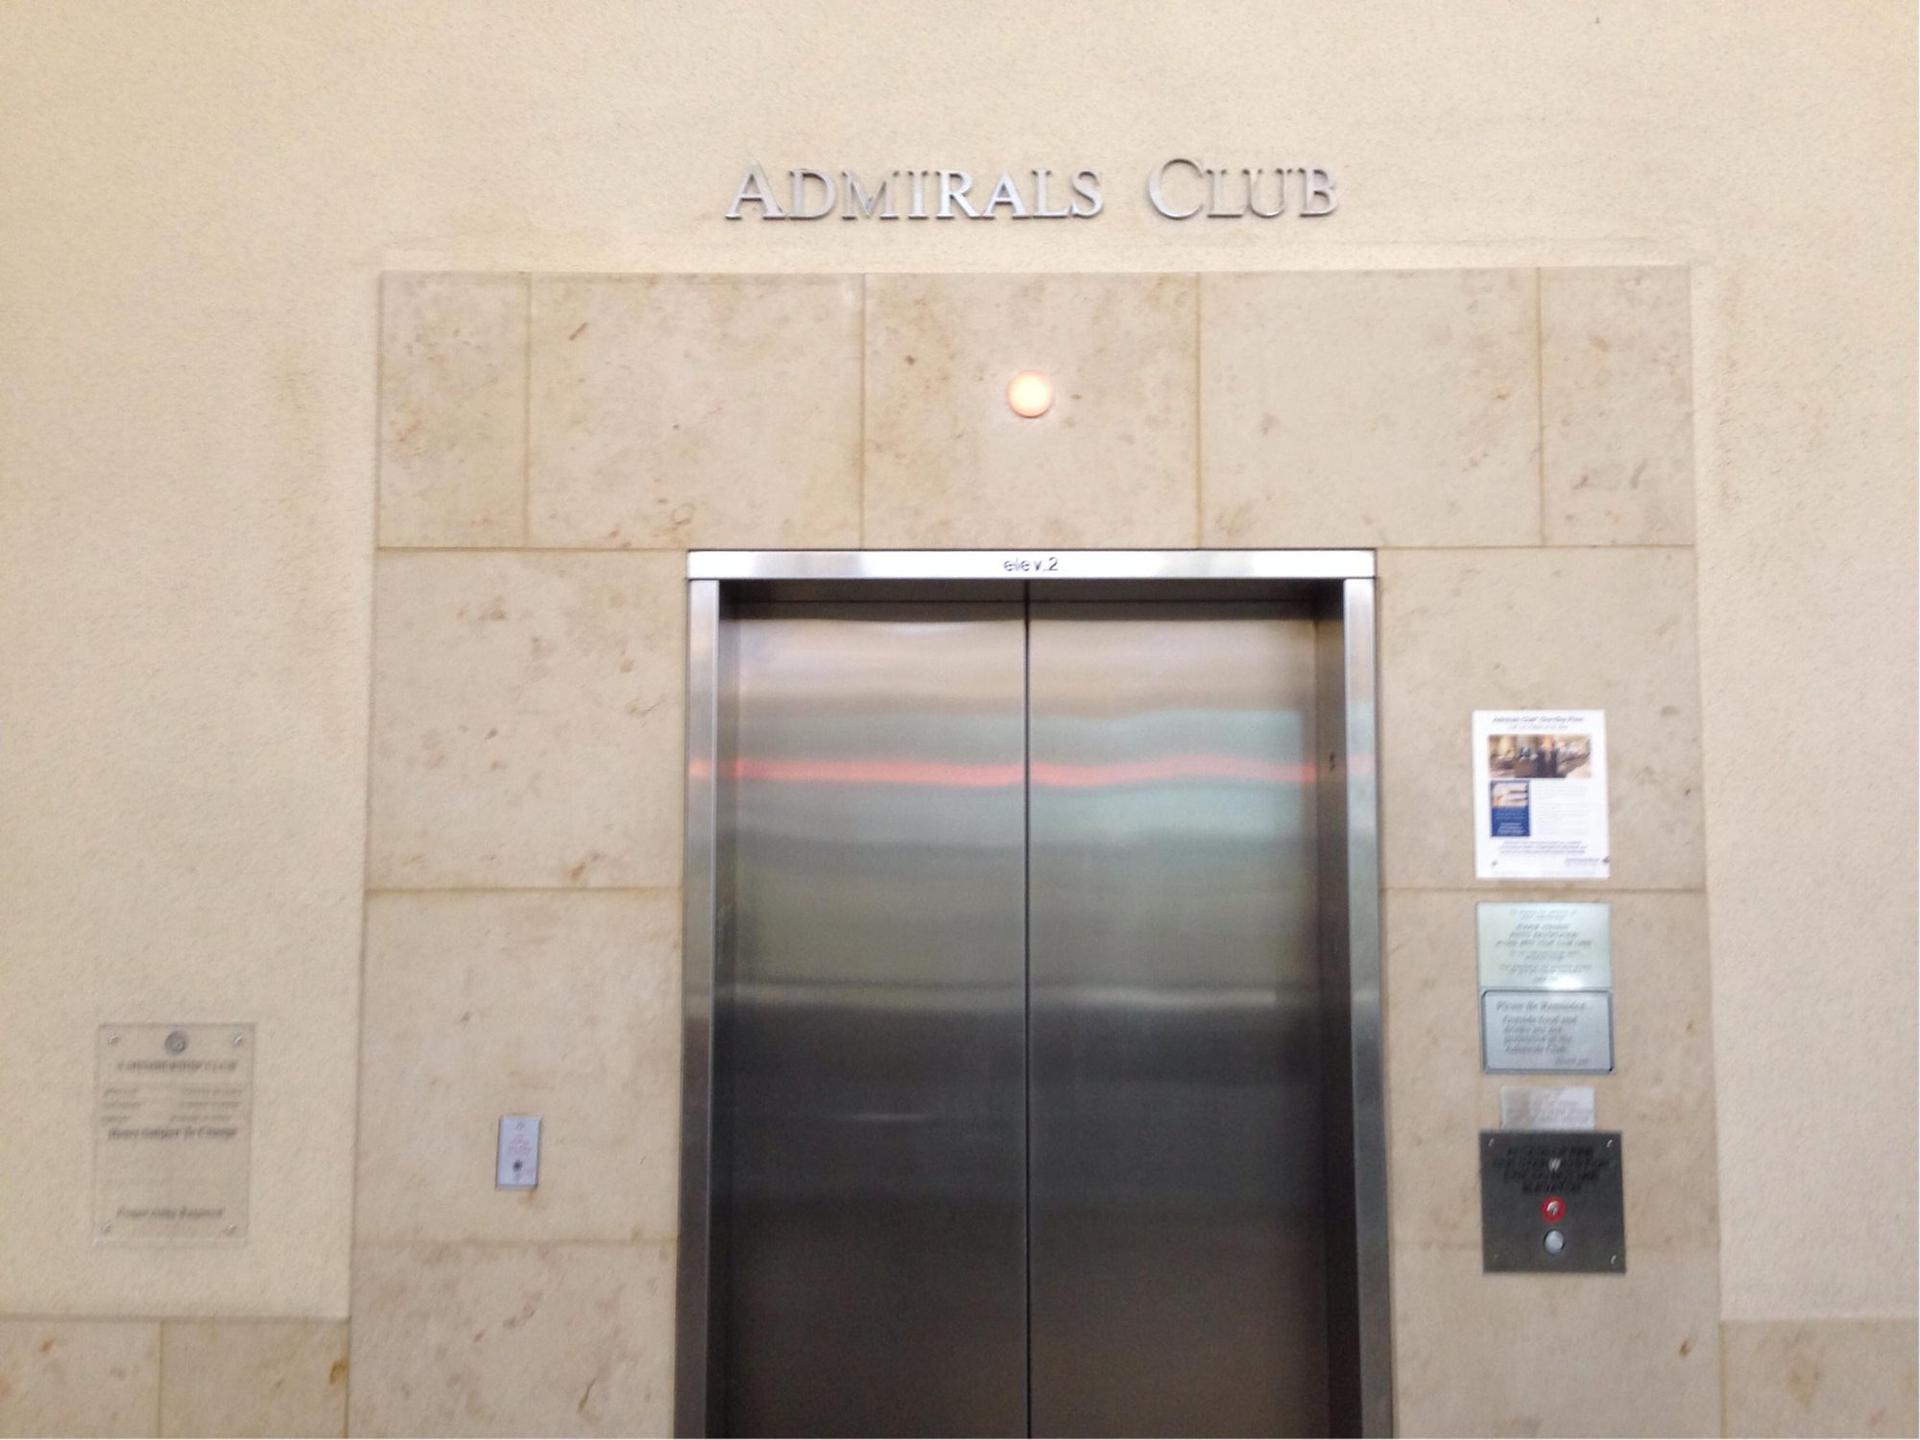 American Airlines Admirals Club image 4 of 12